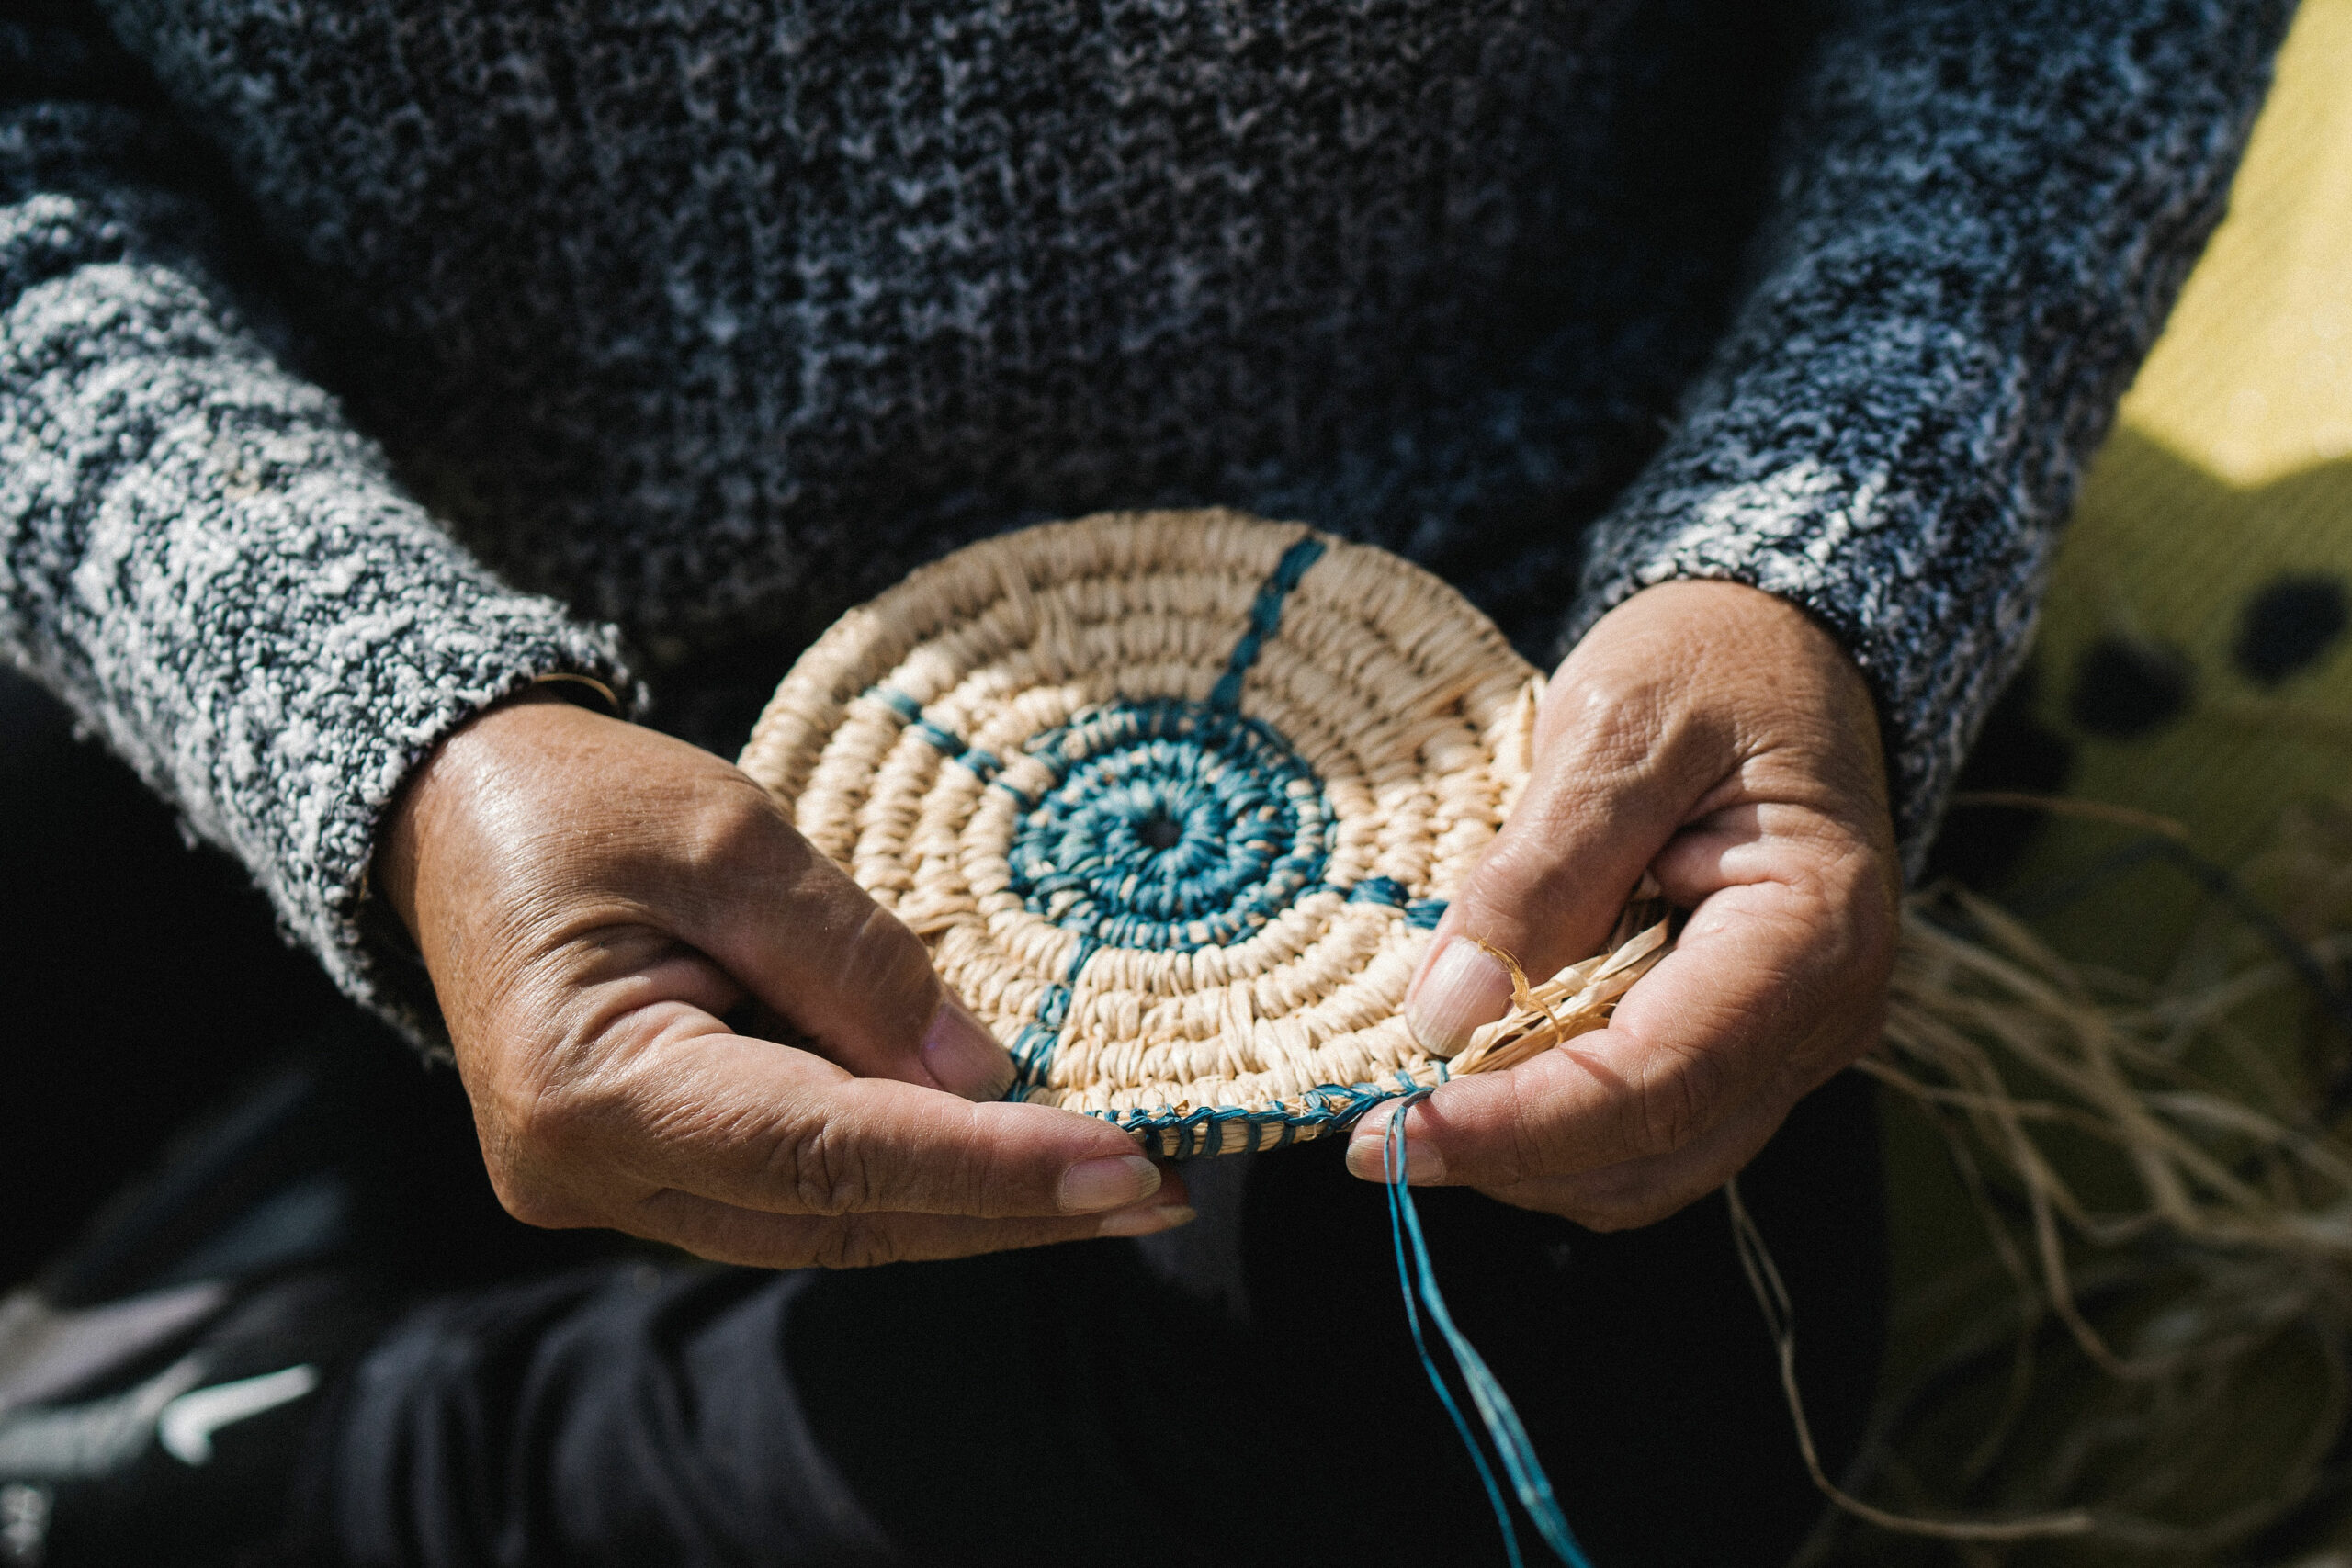 CONNECT TO COUNTRY (Jan 7) – BASKET WEAVING WORKSHOP IN NAROOMA WITH ELDER PATRICIA ELLIS FROM MINGA ABORIGNAL CULTURAL SERVICES